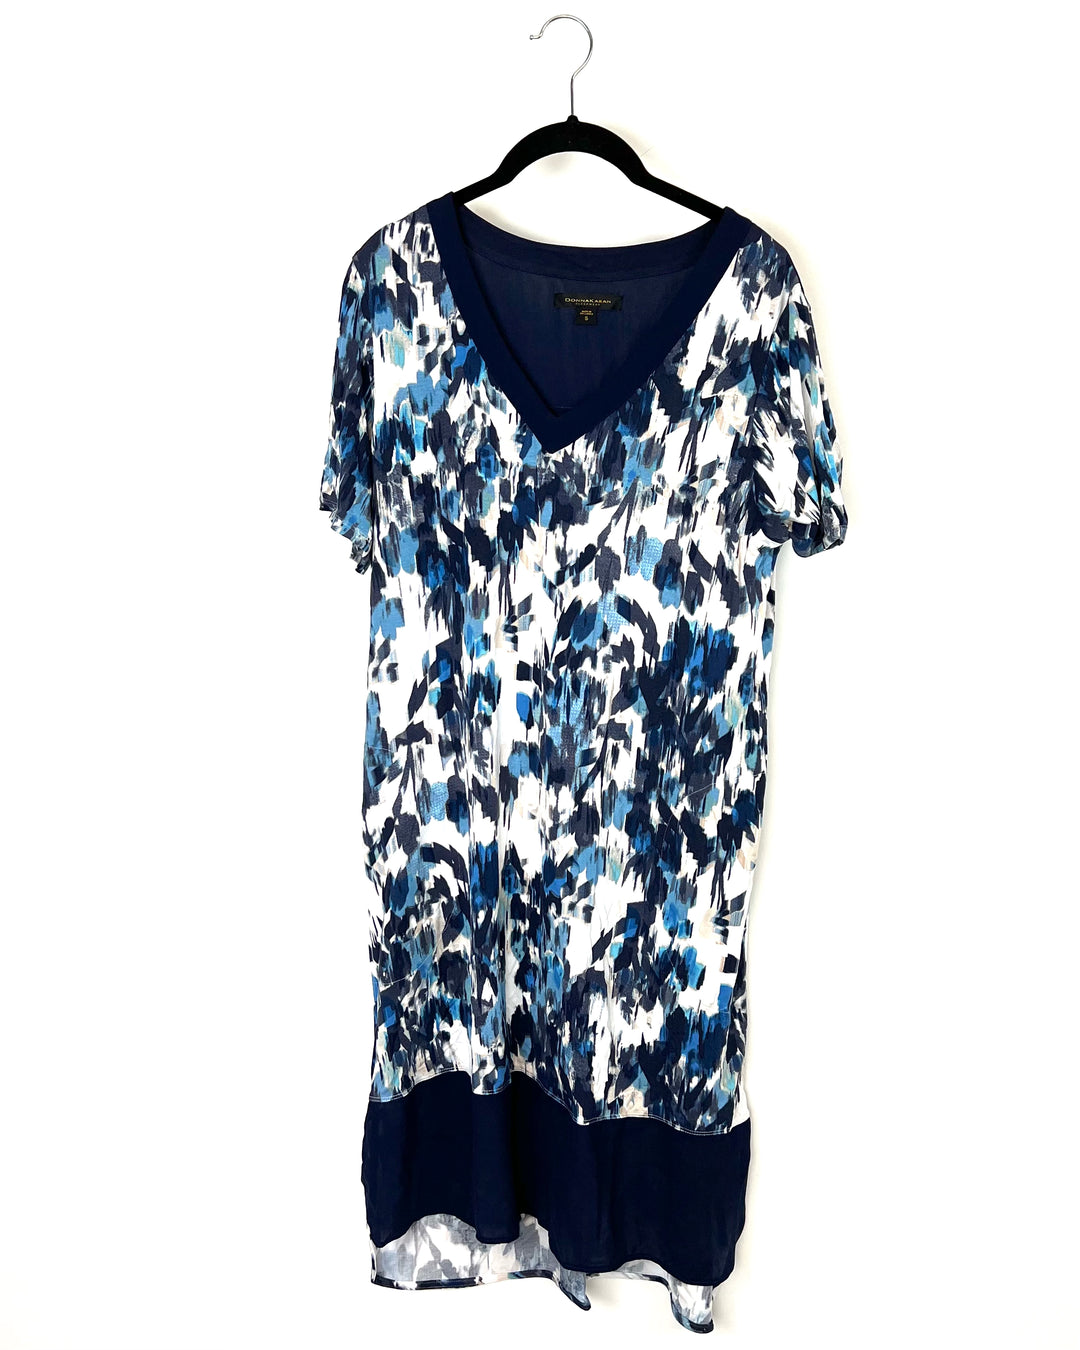 Blue And White Printed Lounge Wear Dress - Small